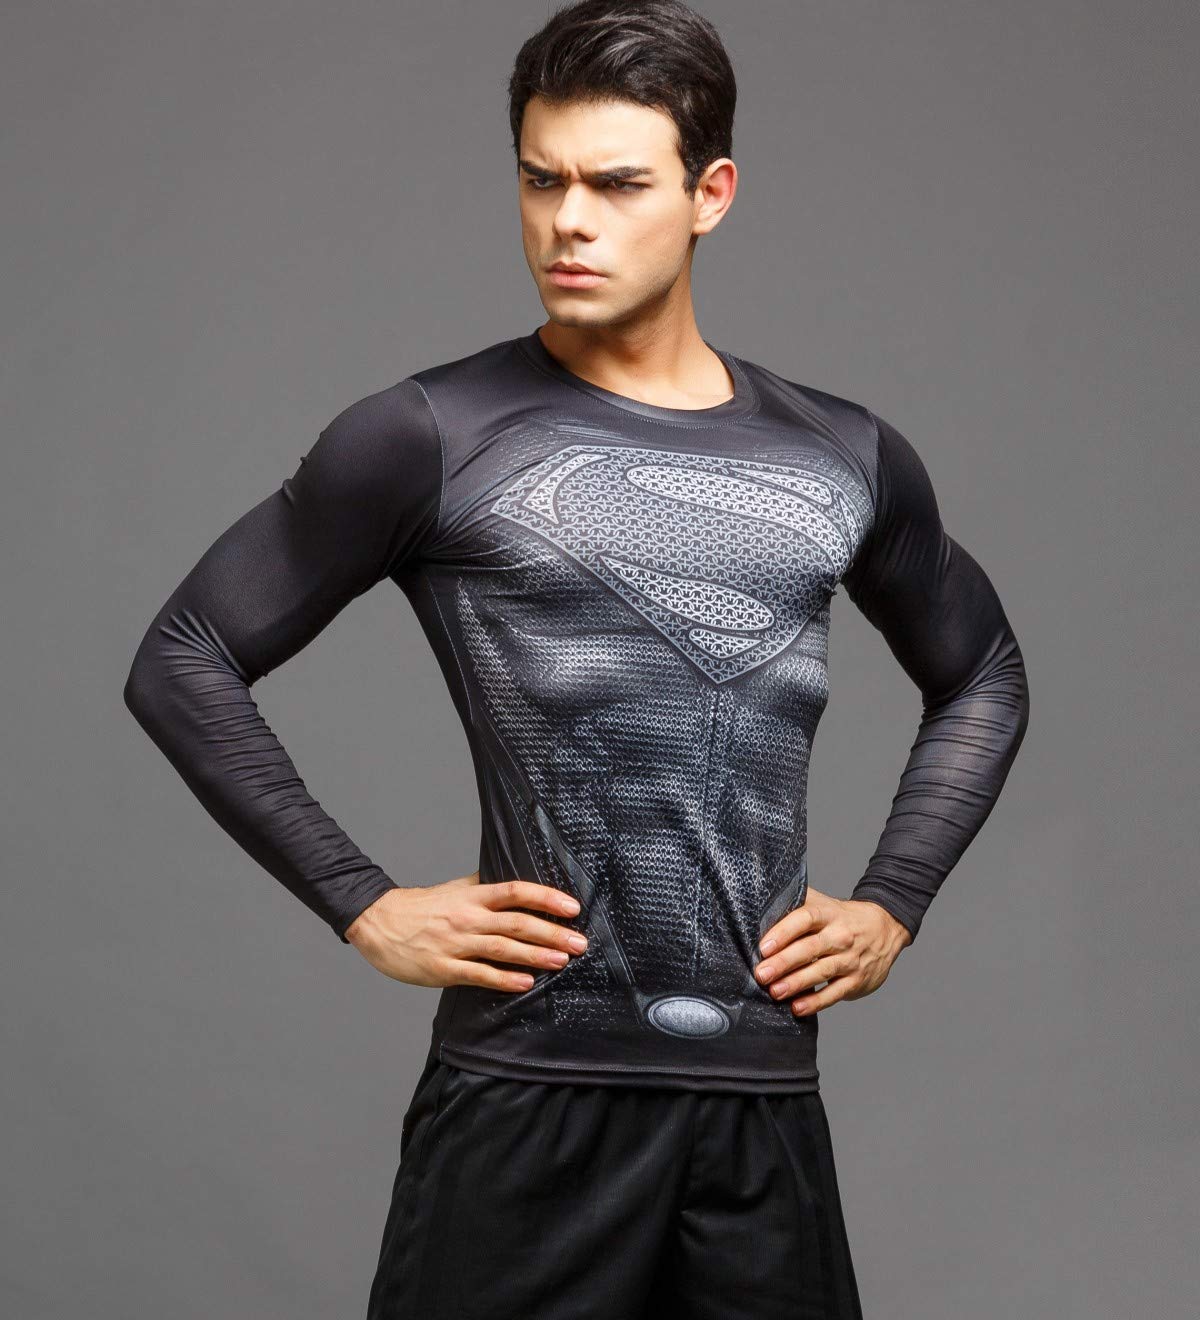 Red Plume Men's Compression Sports Shirt Cool Super Person Running Long Sleeve Tee